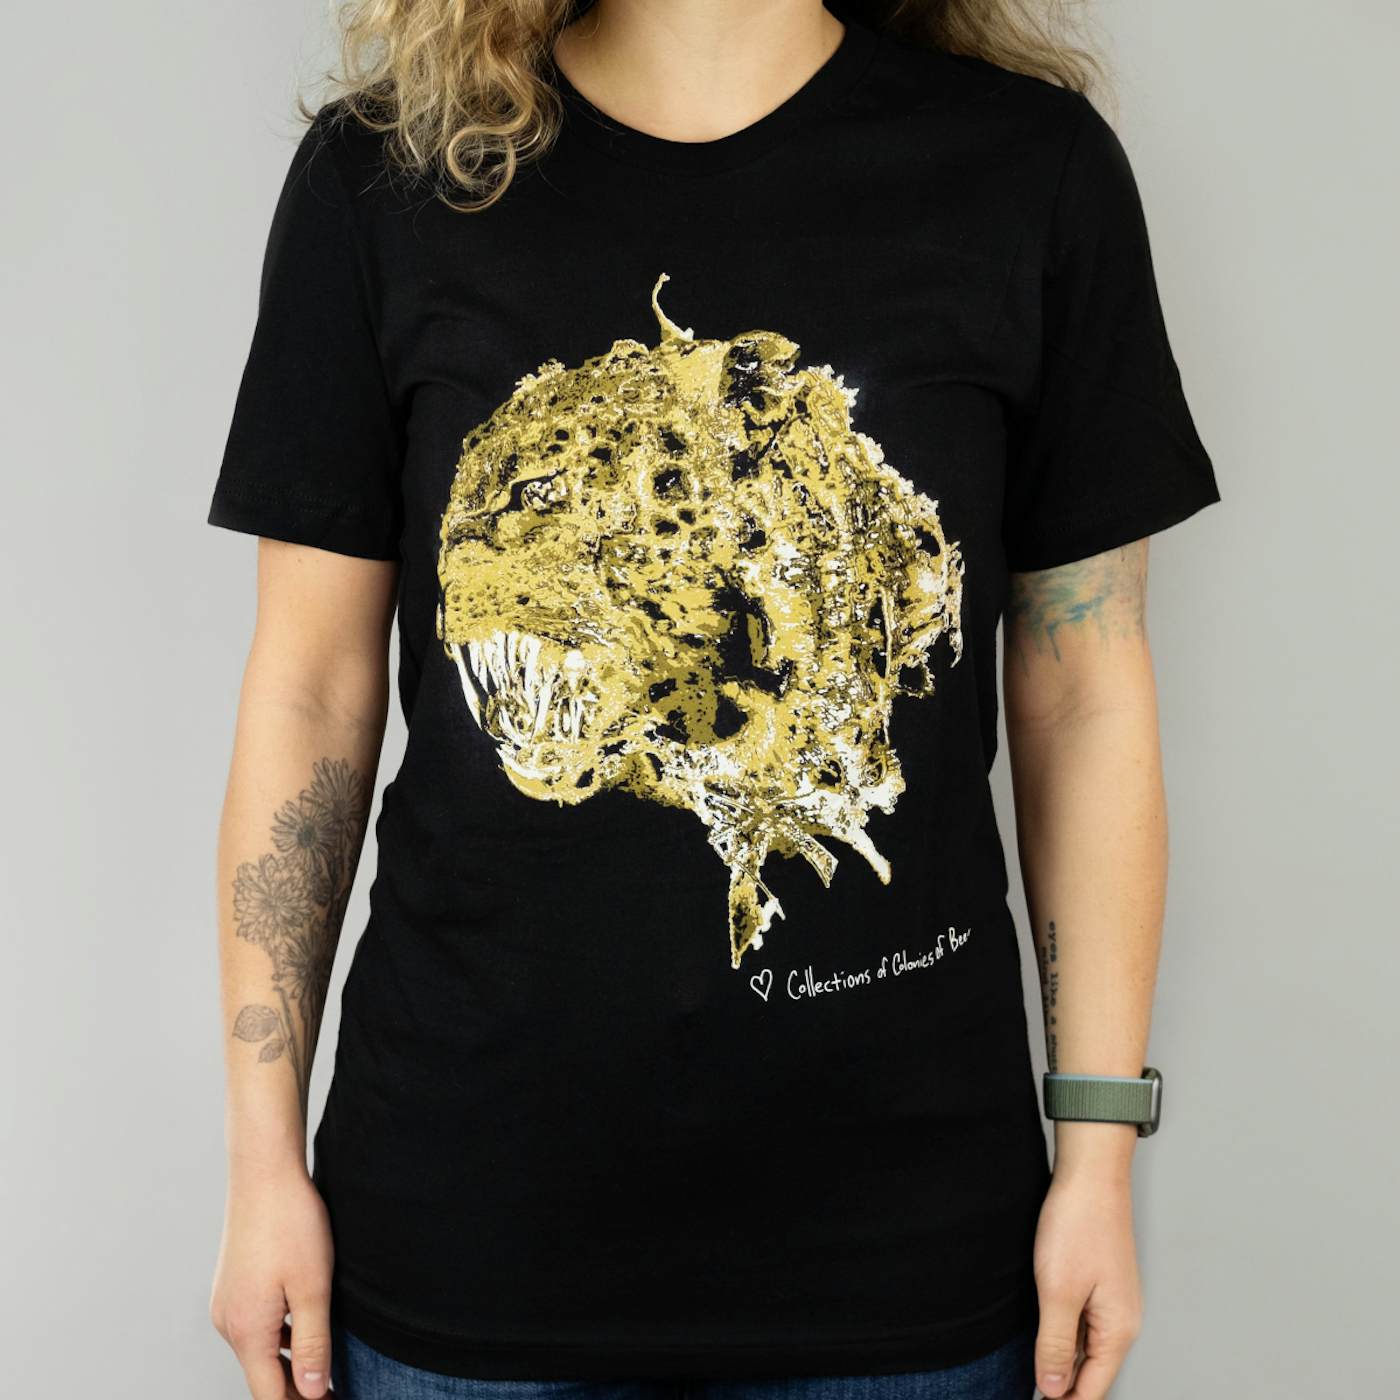 Collections Of Colonies Of Bees Golden Cat T-Shirt